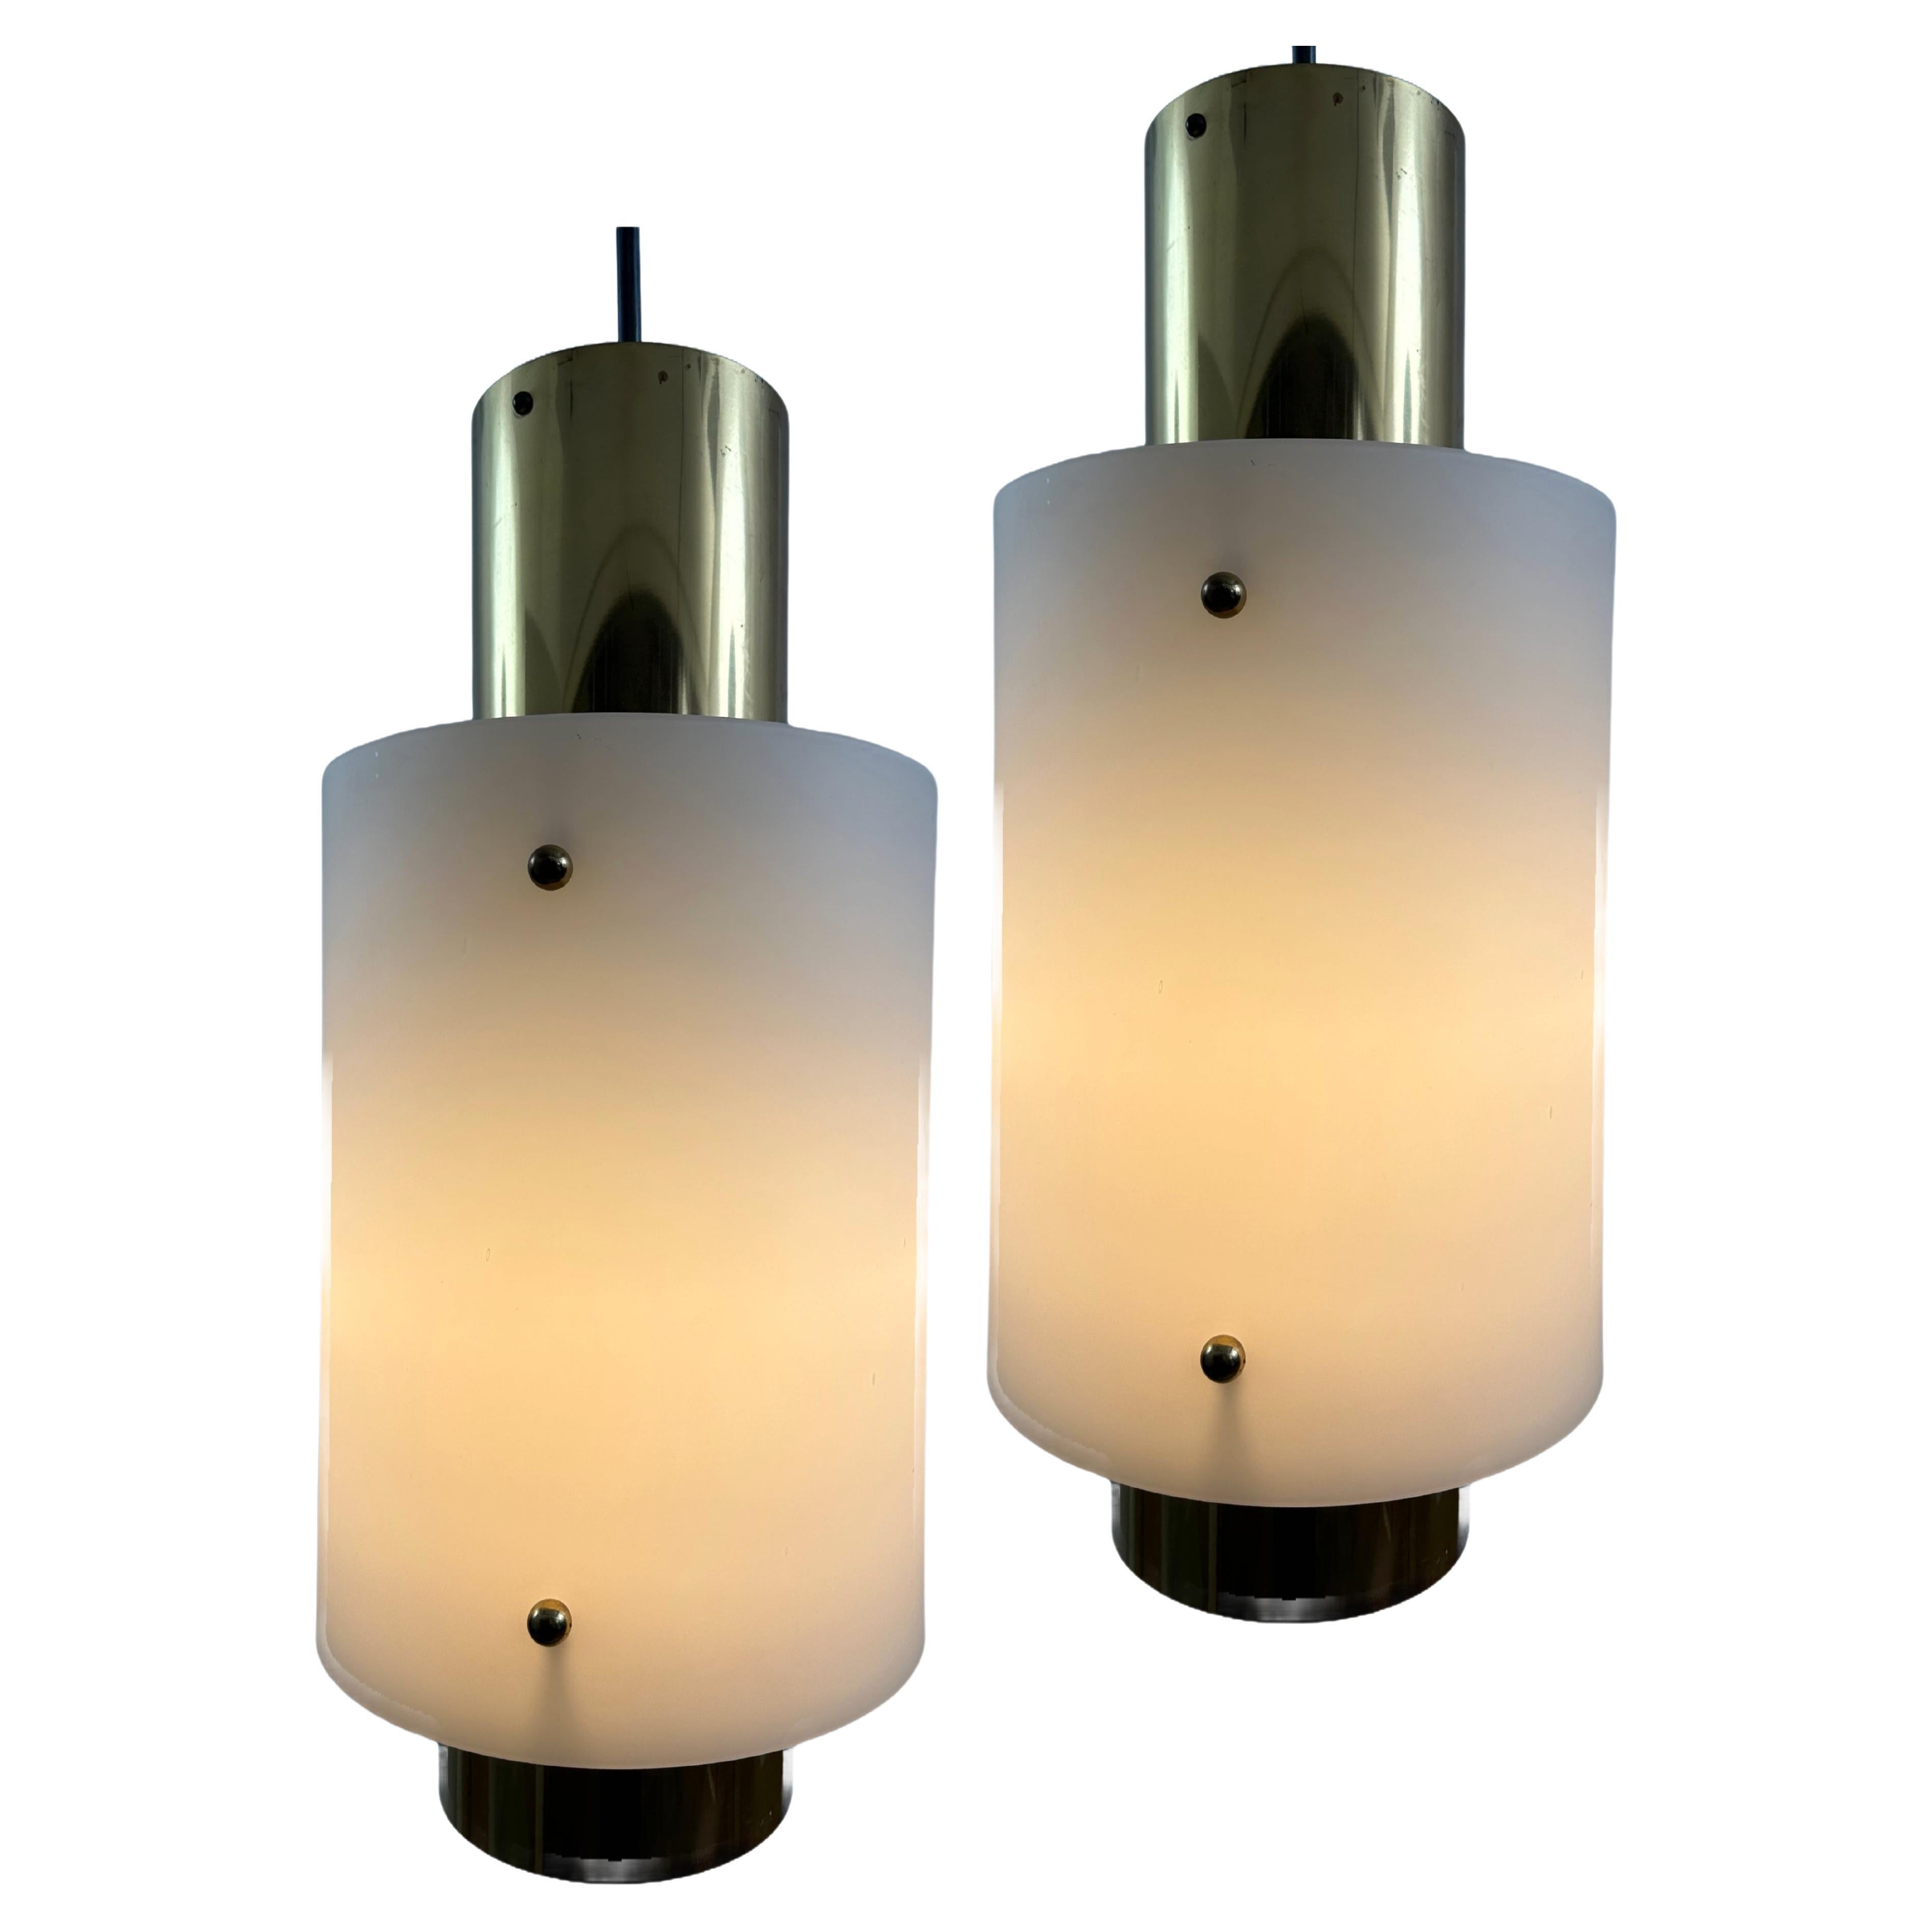 Pair of Large Size Paavo Tynell Pendant Lights by Taito Oy - 1950s